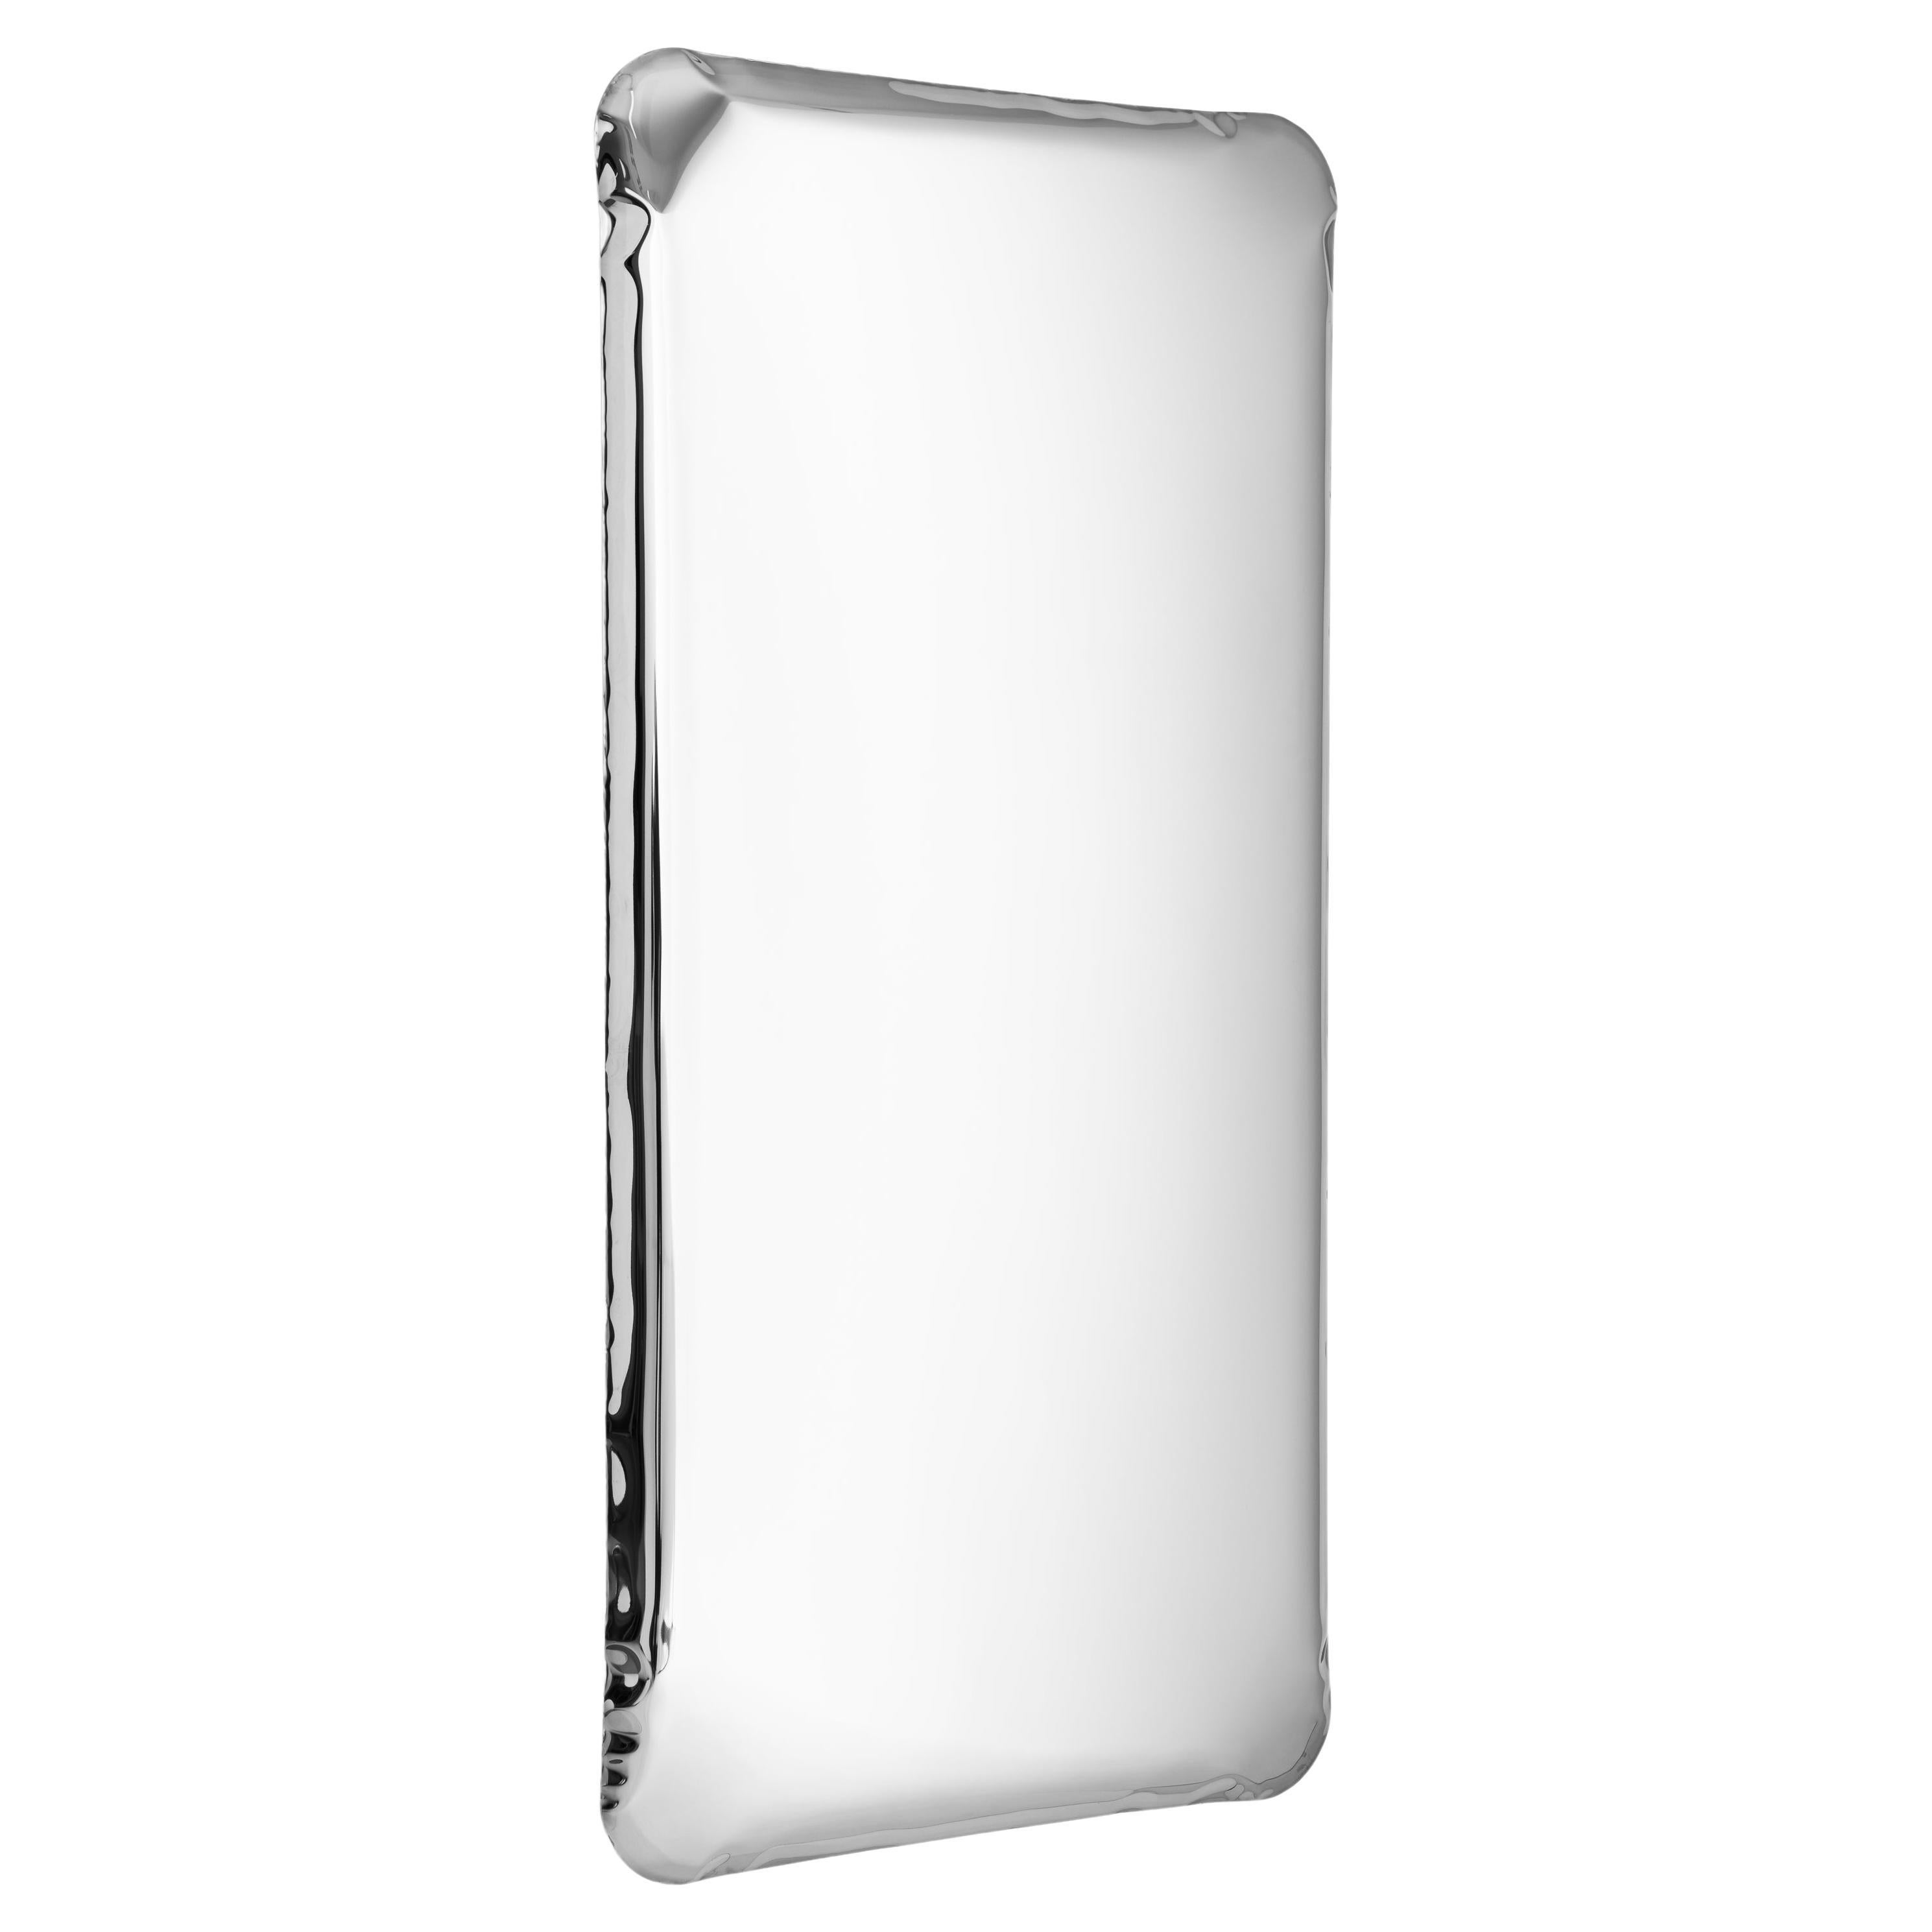 Stainless Steel Tafla Q2 Sculptural Wall Mirror by Zieta For Sale